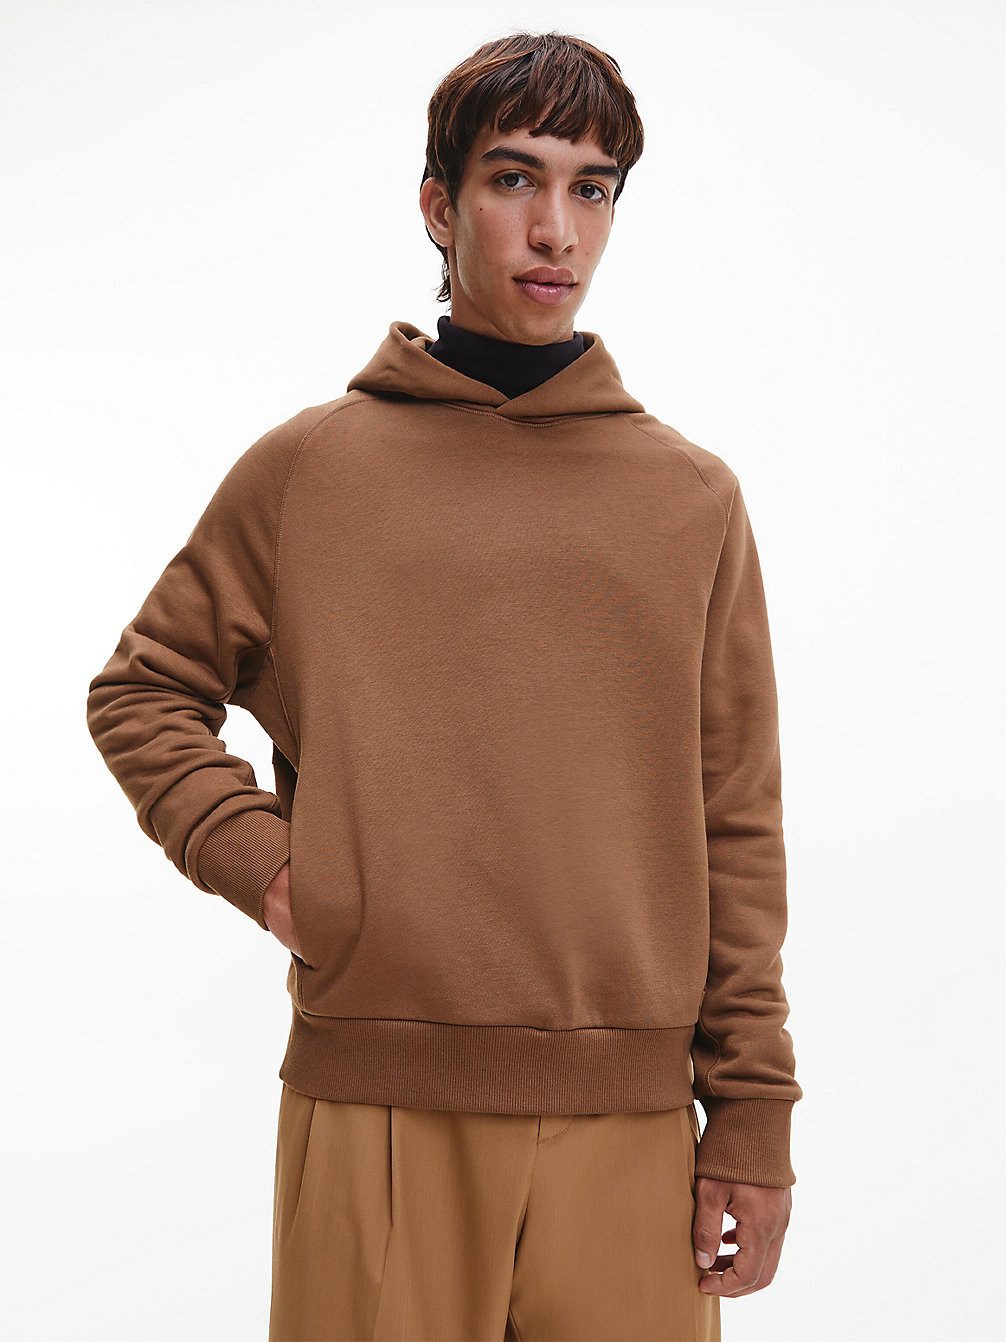 Sweat-Shirt À Capuche Relaxed En Polaire > CHESTER BROWN > undefined hommes > Calvin Klein